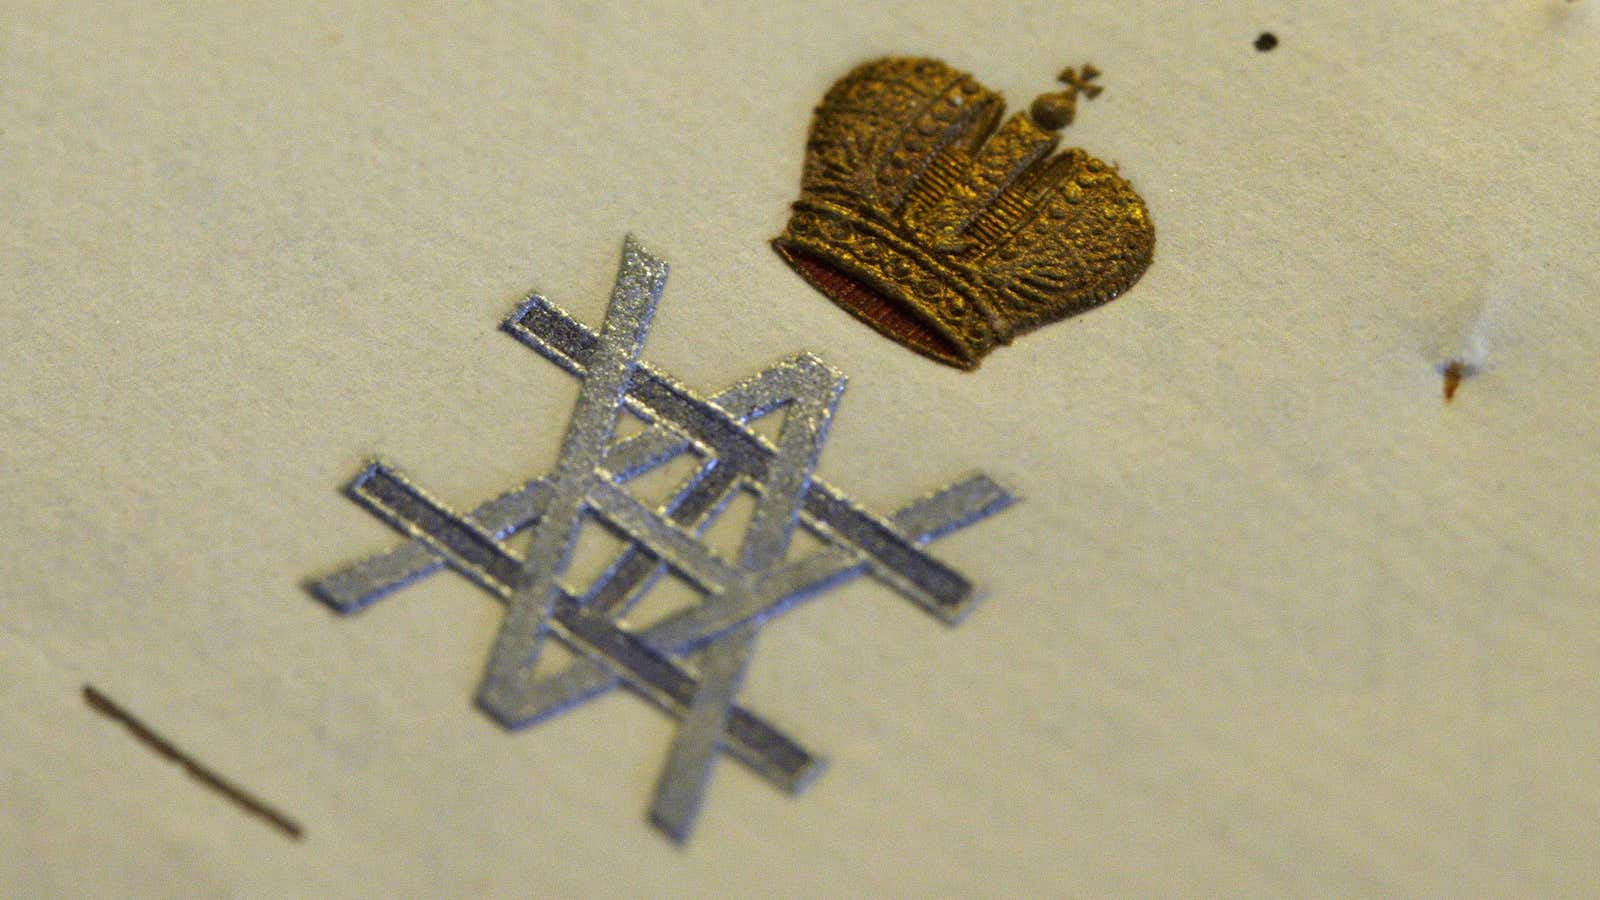 Two letters with the Emperor arms, signed by Tsar Nicholas II are displayed during an auction preview in Rougemont, 150 km (93.2 miles) east of Geneva, November 29, 2012. Prince Nicolas Romanov of Russia is putting some 3000 items, including many photographs and letters of the last Tsar Nicholas II, for sale during an auction in Geneva December 10 to 13, 2012. REUTERS/Denis Balibouse (SWITZERLAND – Tags: SOCIETY ROYALS) – BM2E8BT13FT01